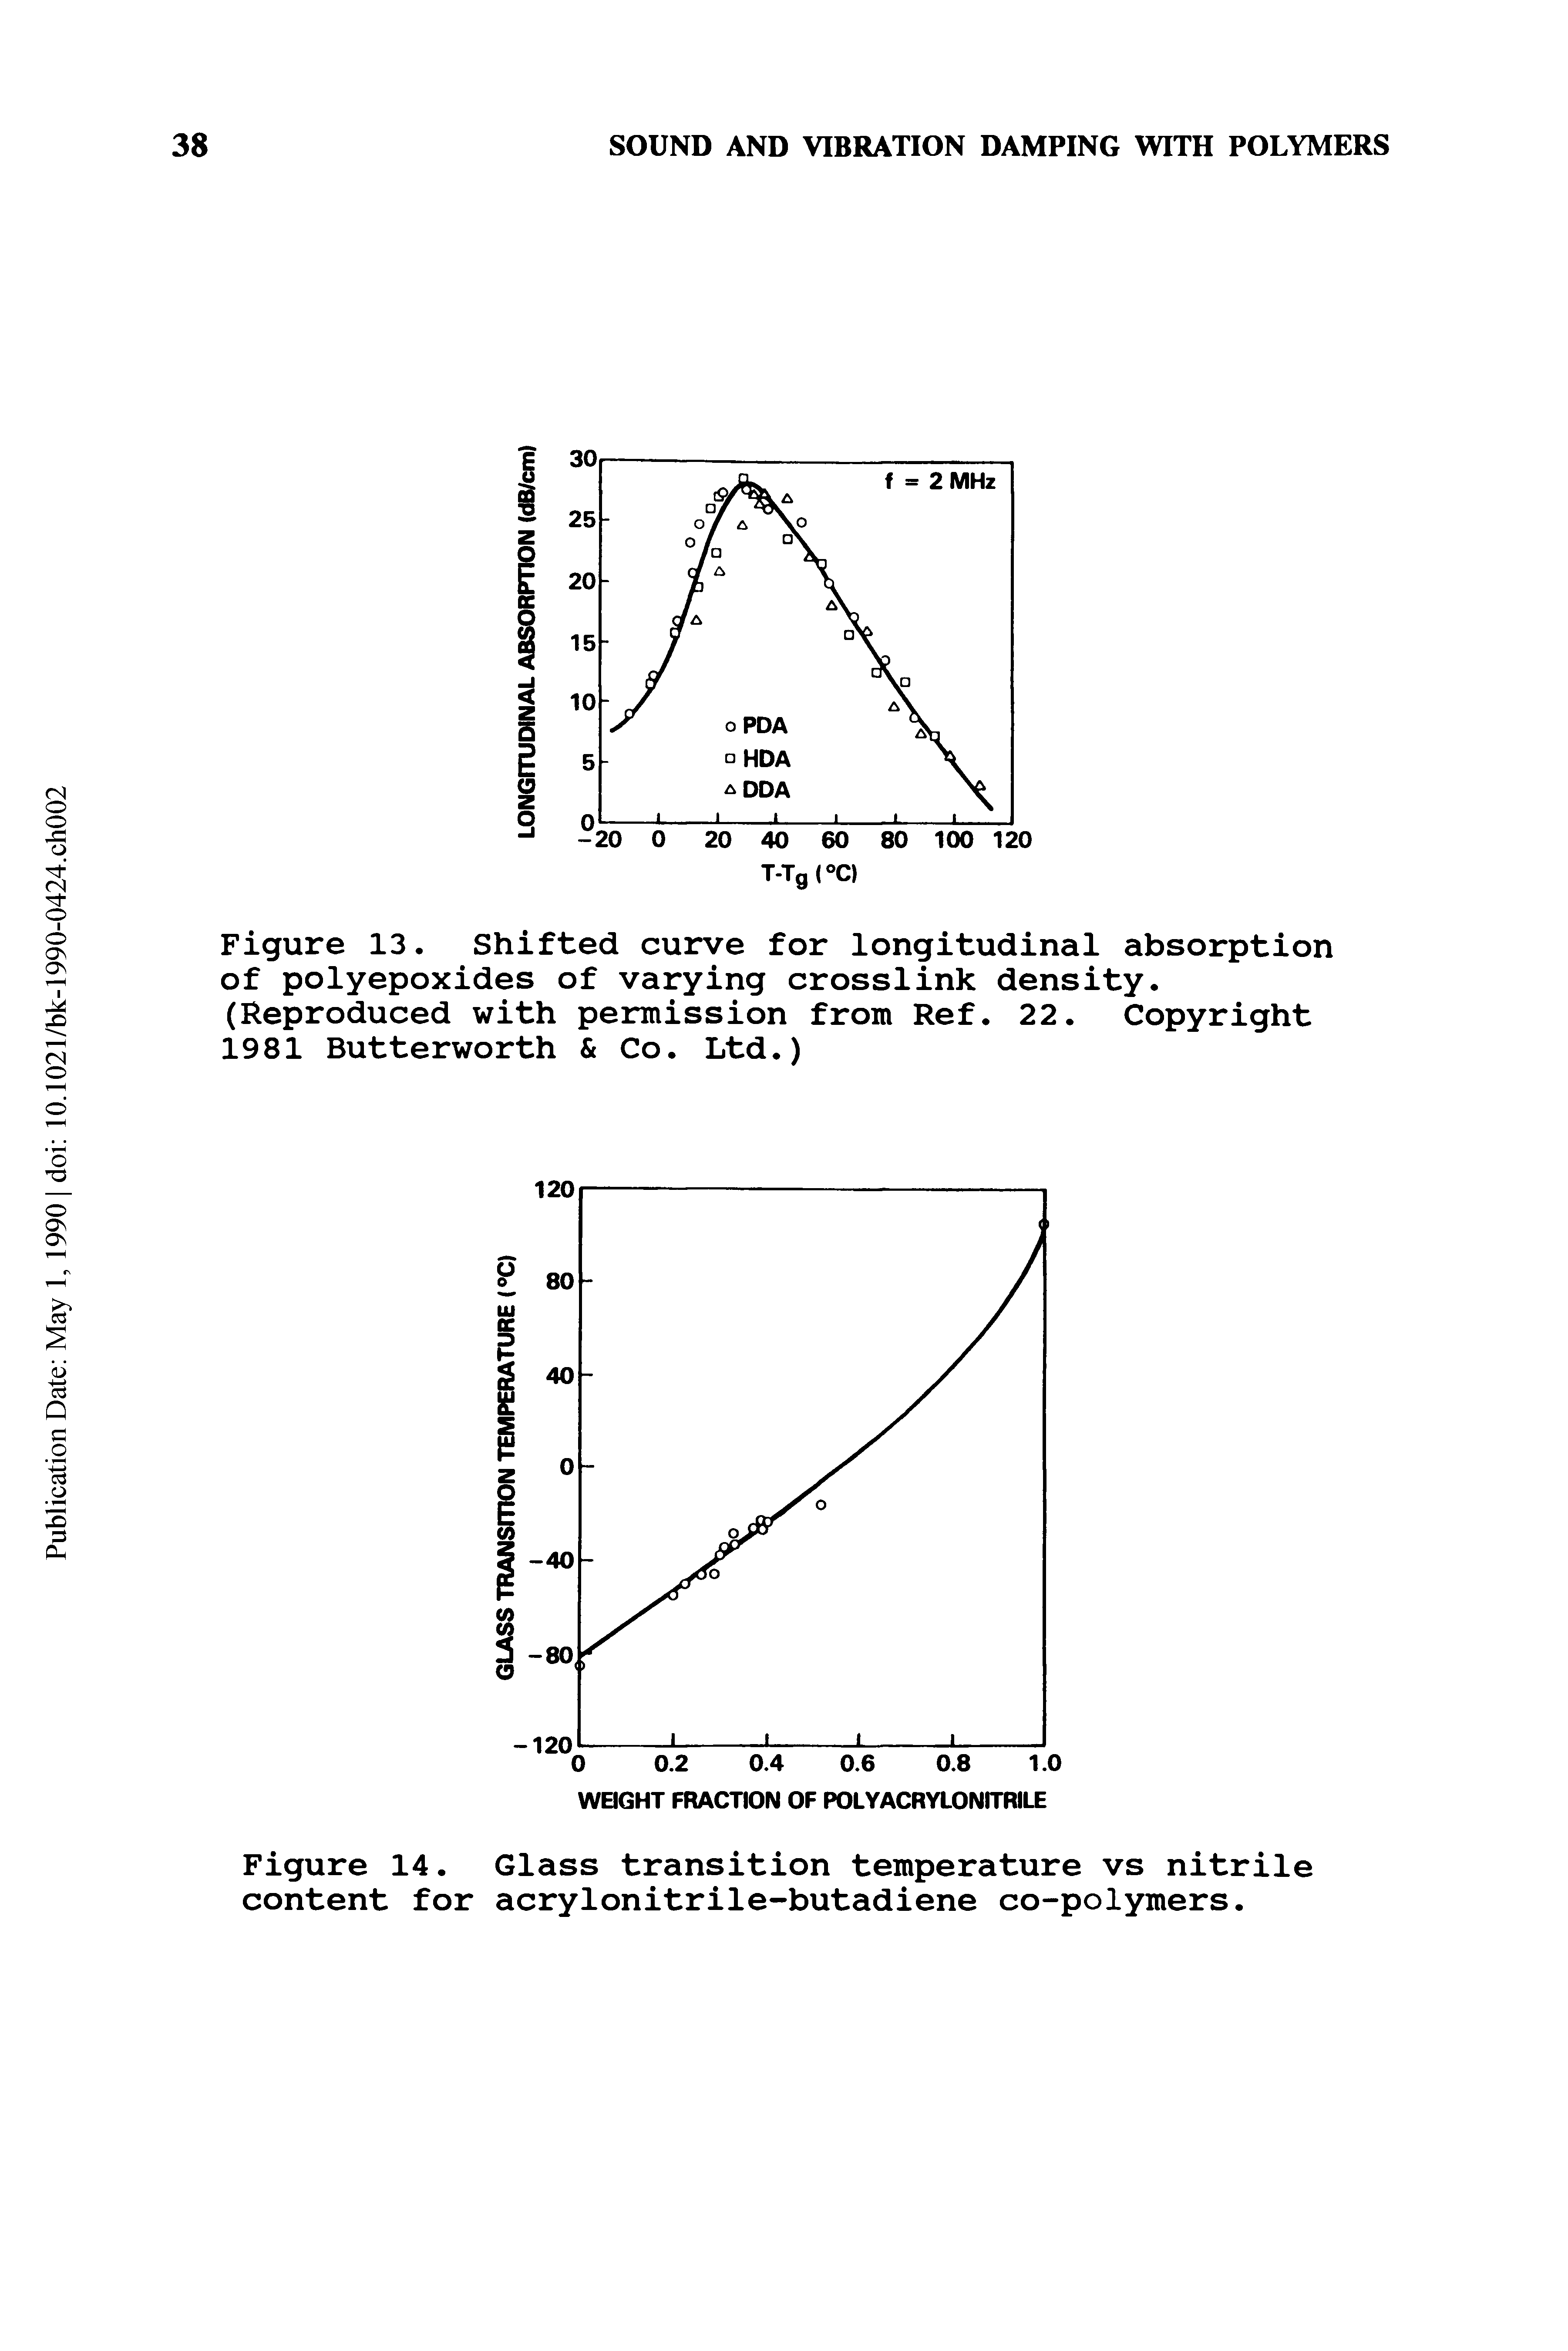 Figure 14. Glass transition temperature vs nitrile content for acrylonitrile-butadiene co-polymers.